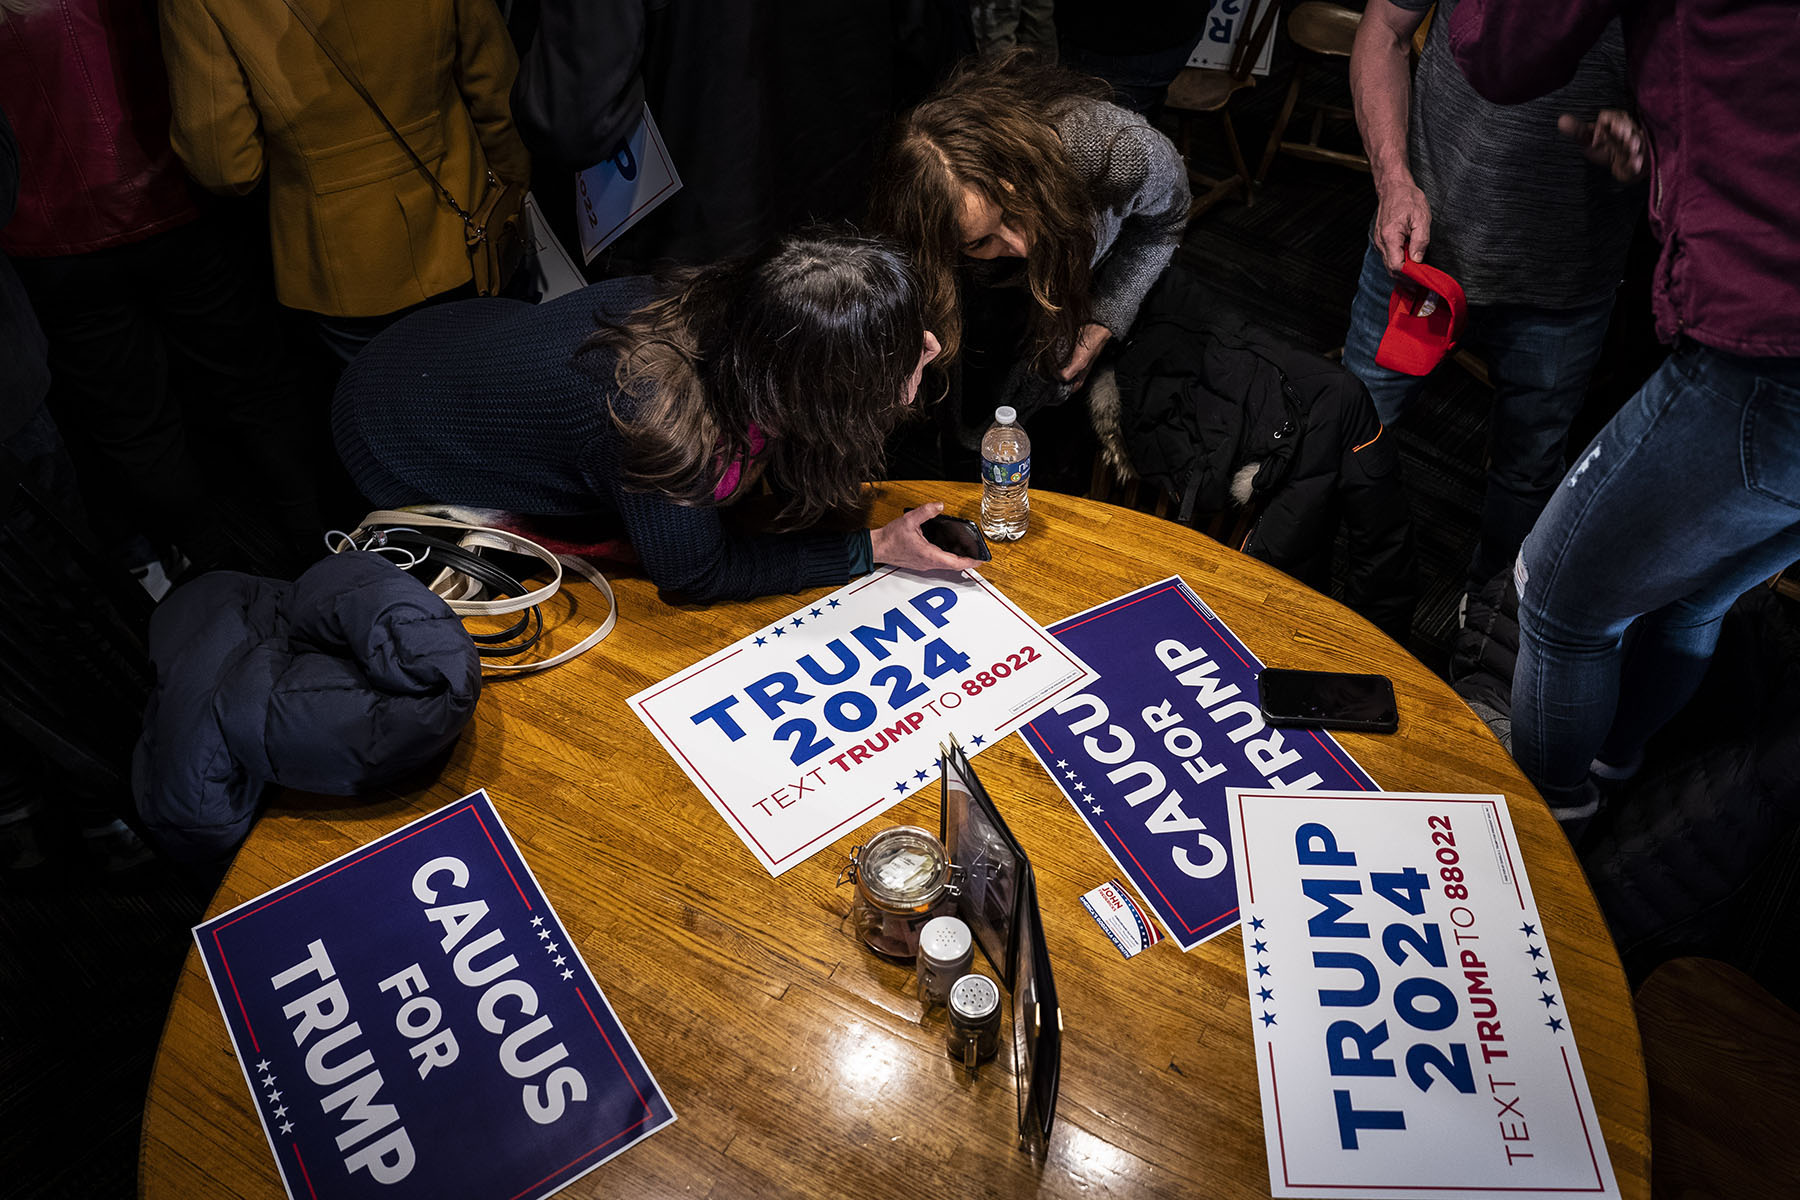 Donald Trump supporters chat ahead of the Iowa Republican caucuses in January 2024, in Urbandale, Iowa.